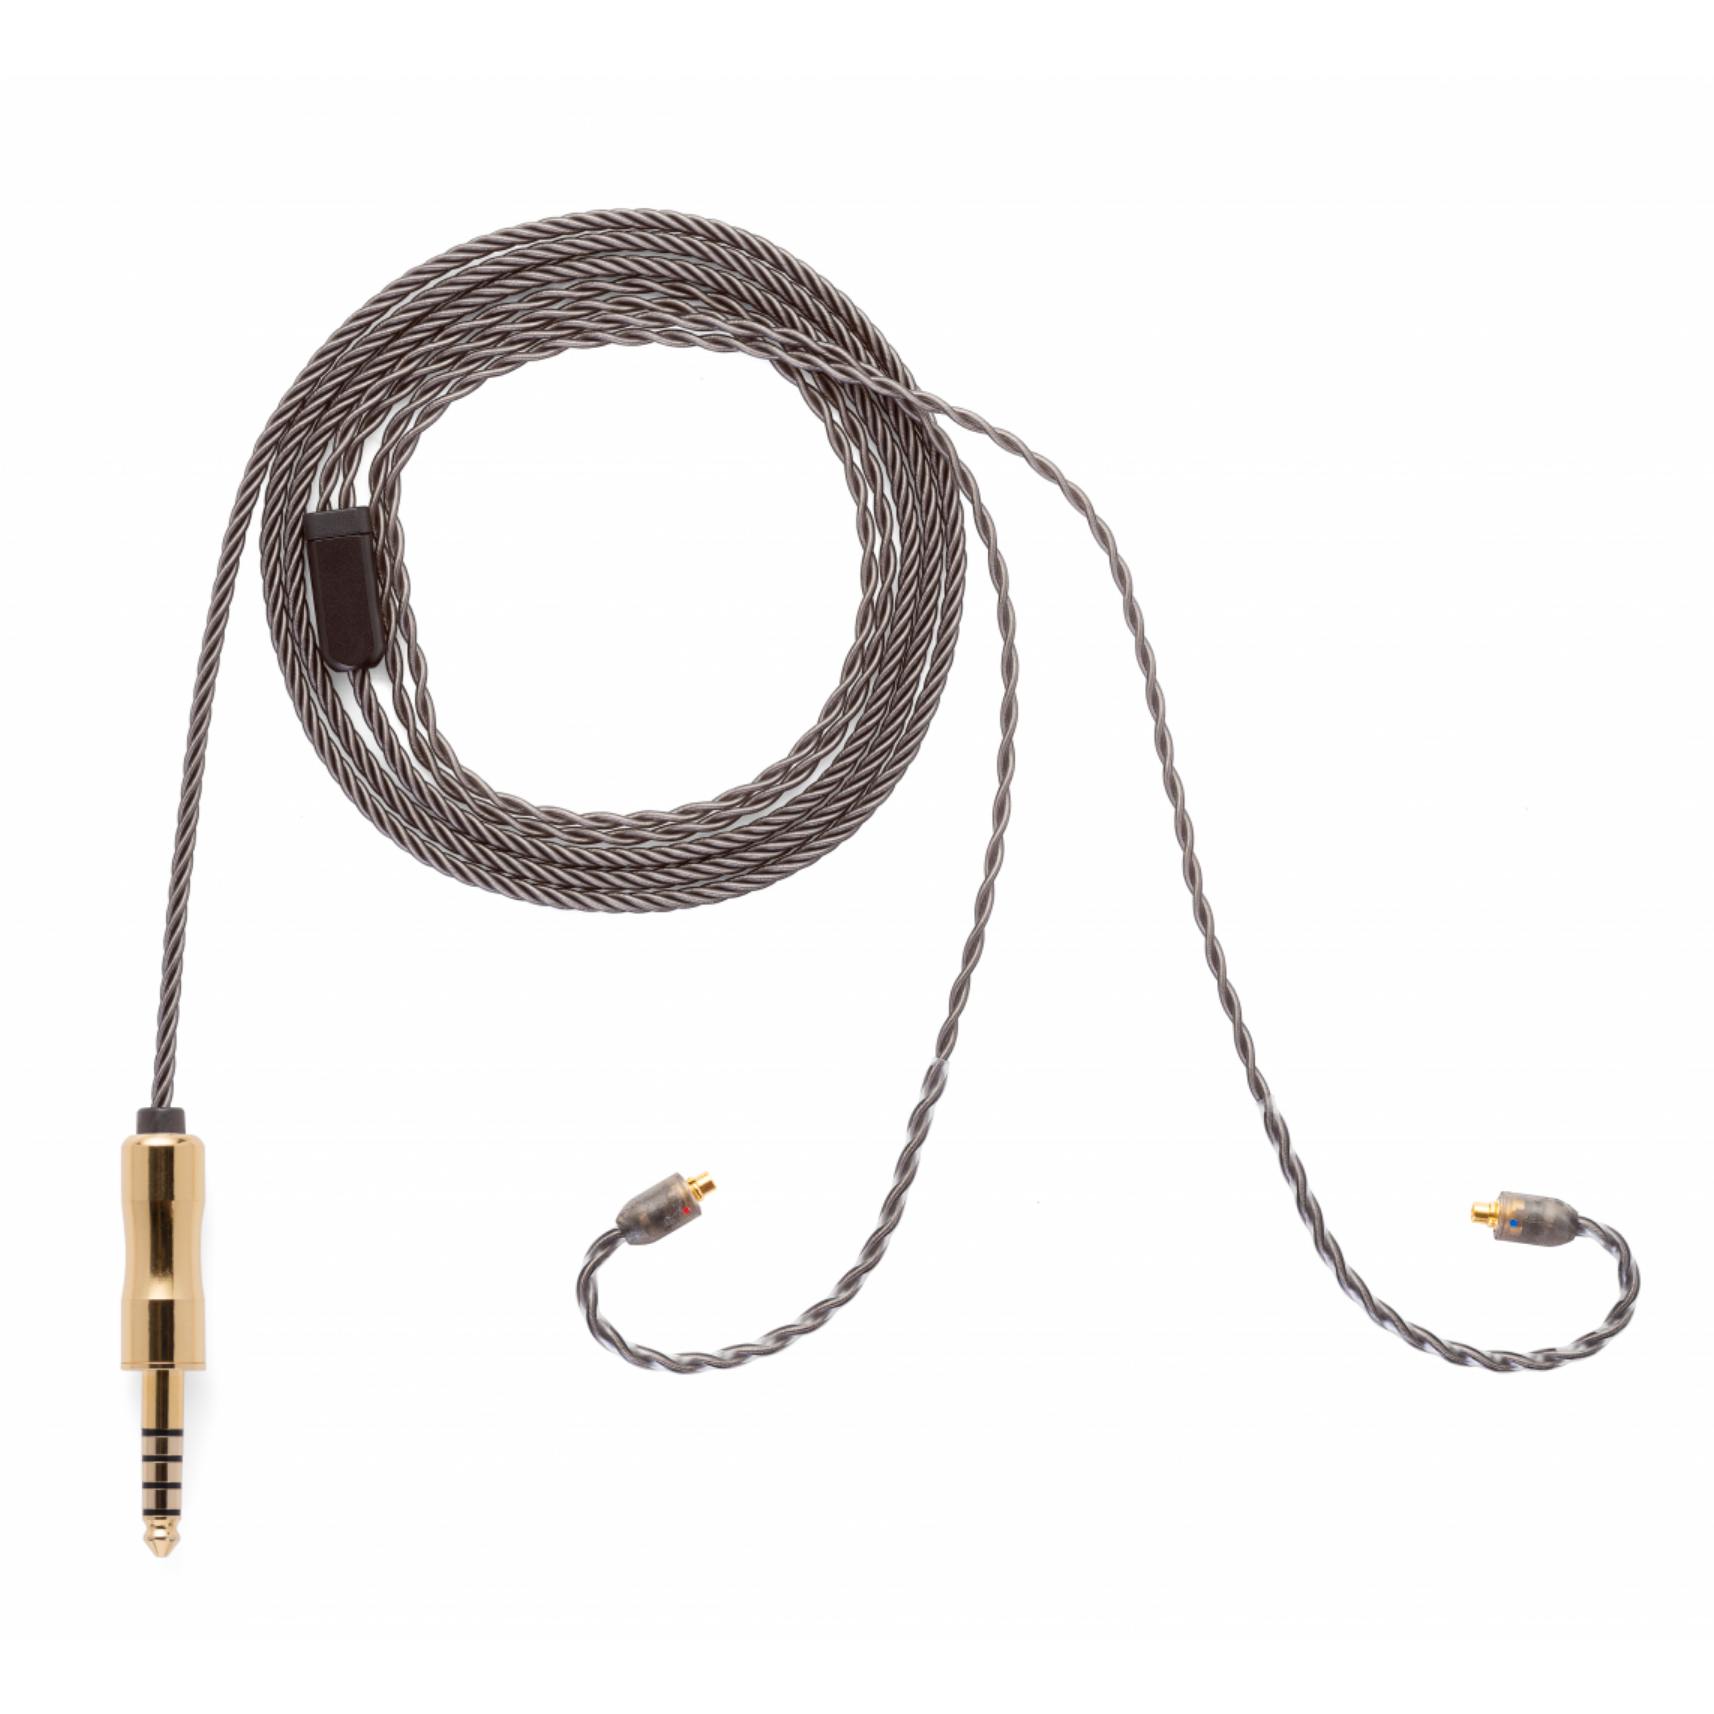 ALO audio Super Smoky Litz Cable MMCX Upgrade Cable | Bloom Audio